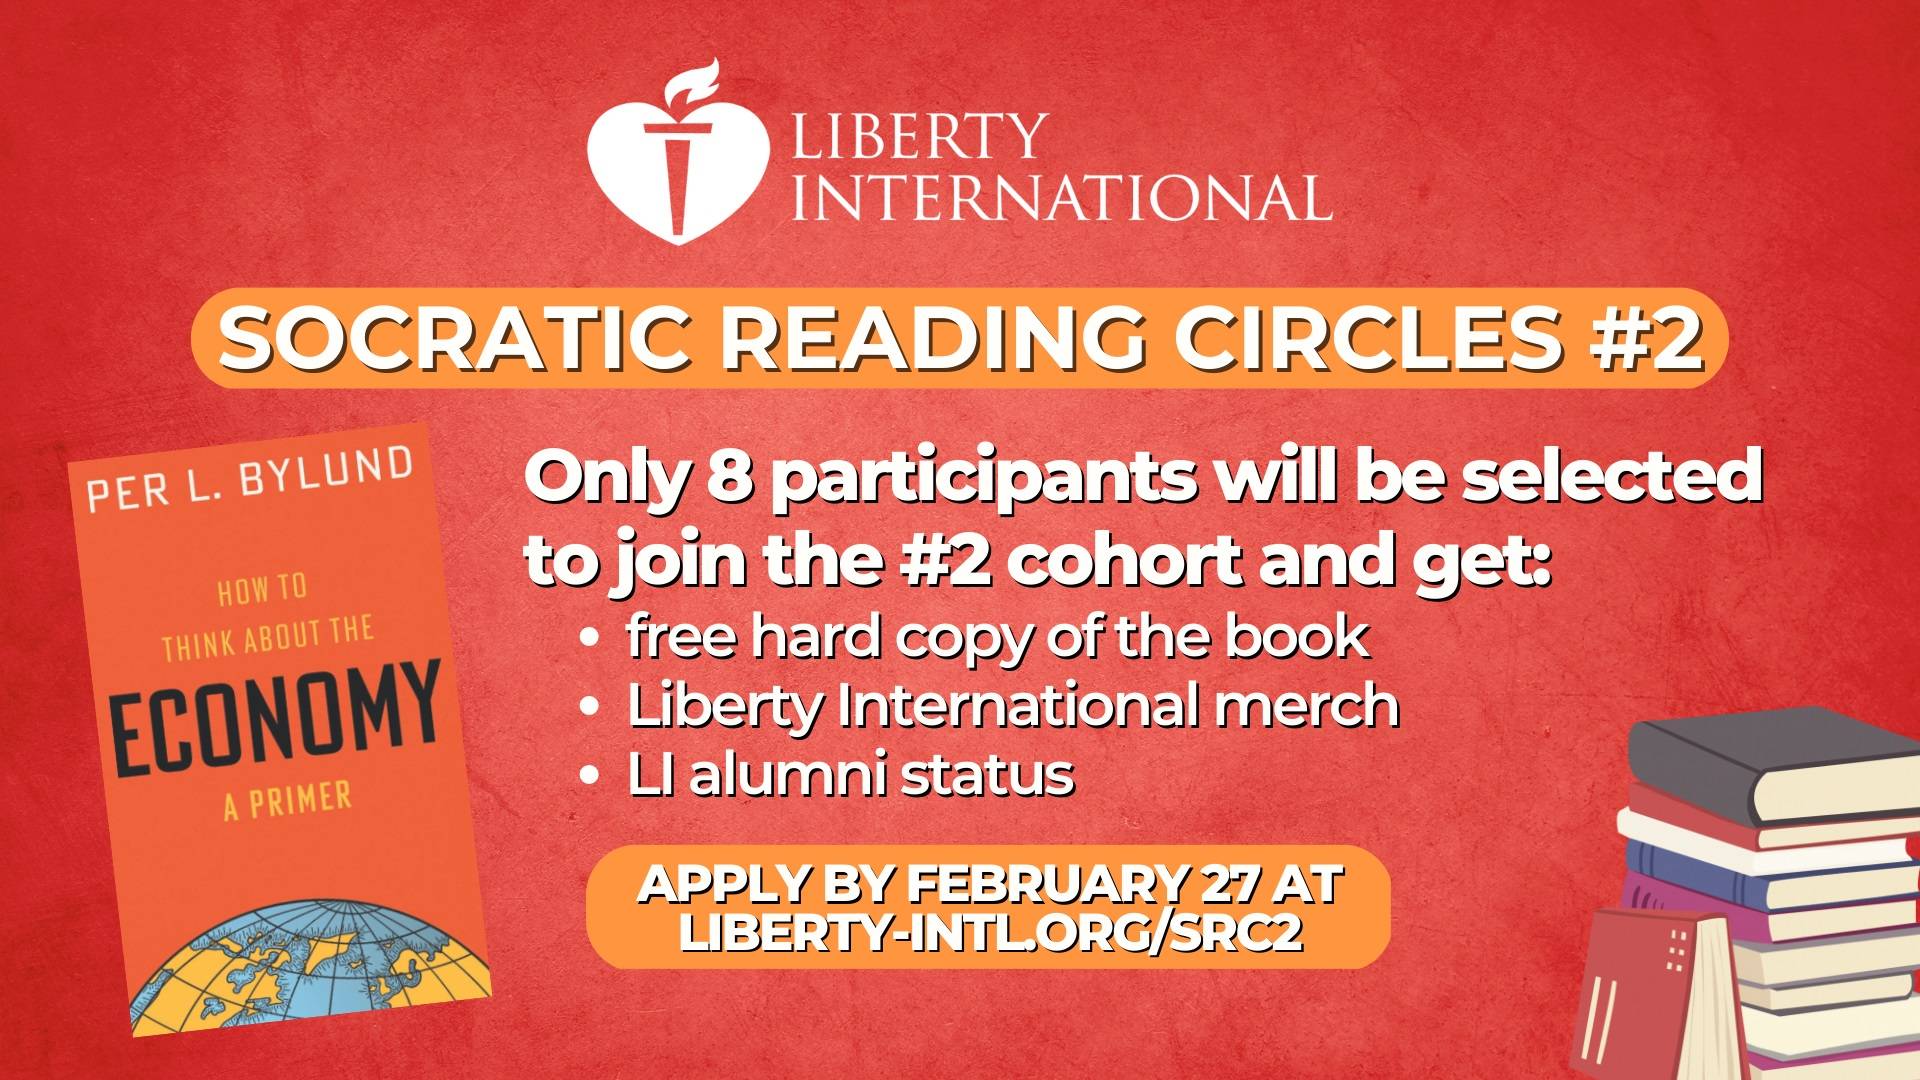 Socratic Reading Circles #2 open application! Join the elite